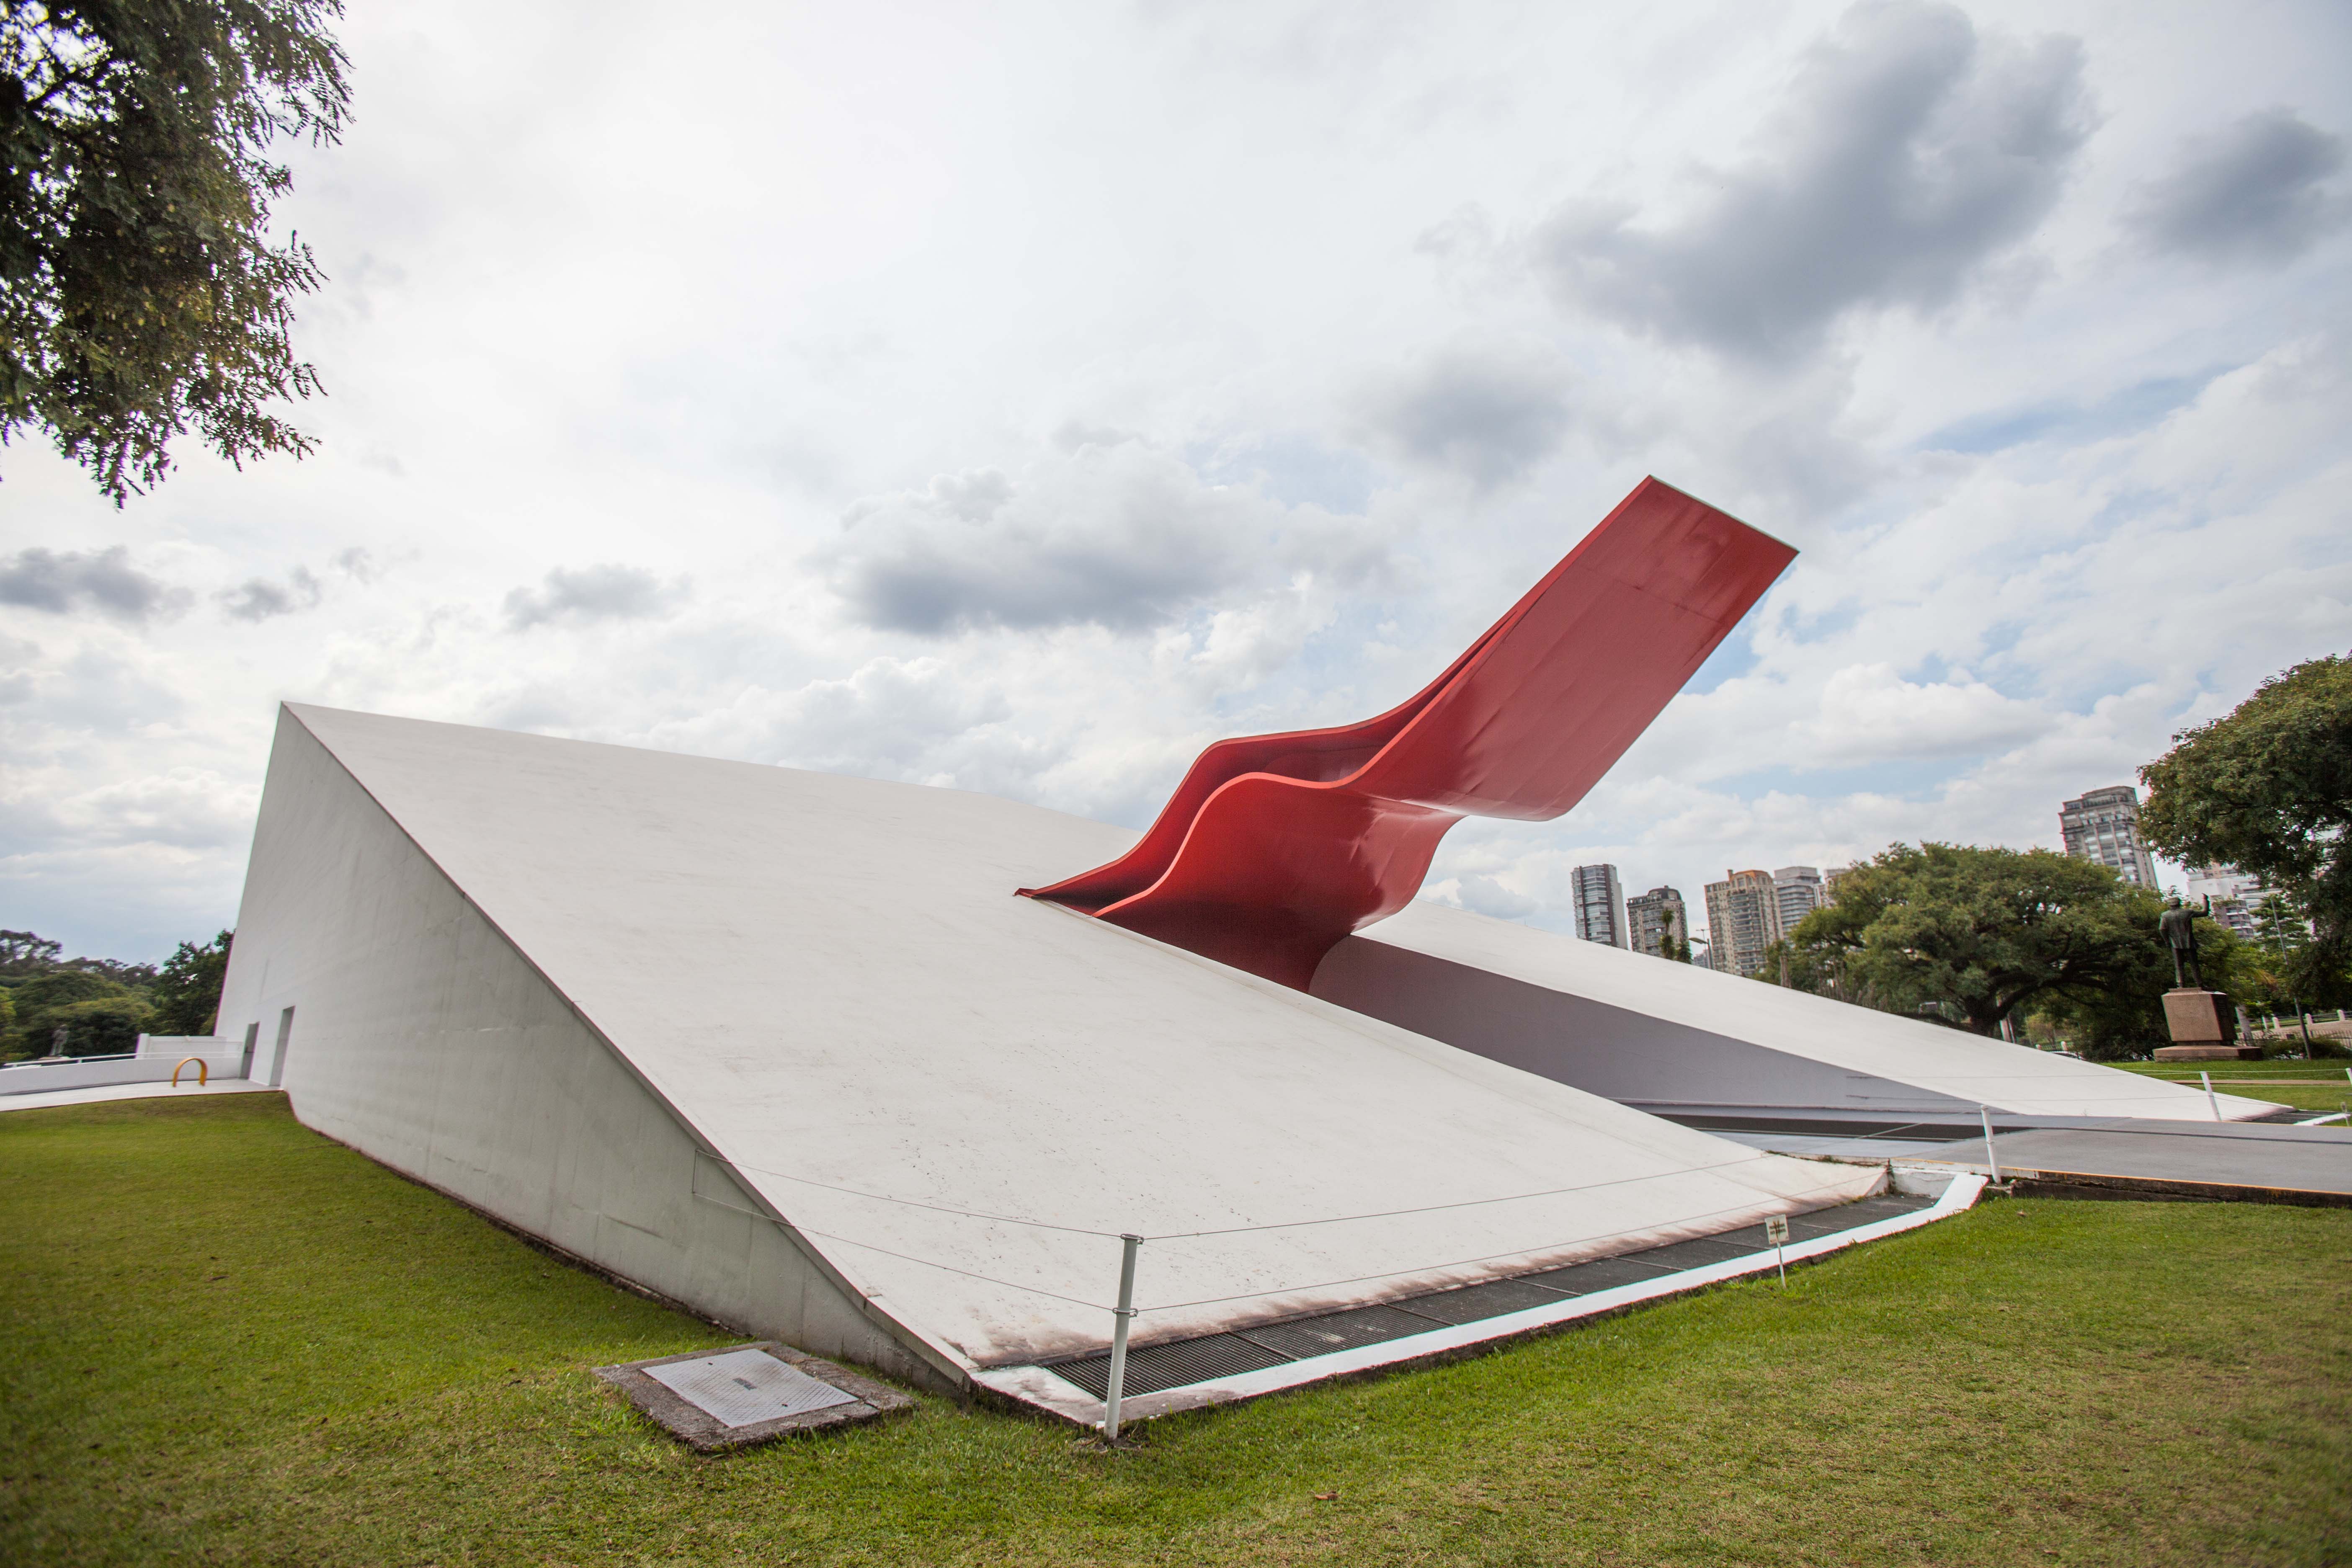 Located in Ibirapuera Park, the Ibirapuera Auditorium was designed in the 1950s by architect Oscar Niemeyer, for the presentation of musical shows, as well as being a school of Brazilian popular music. The Park is listed as a historical heritage site in São Paulo, and covers an area of ​​158 hectares. (Photo: Rogério Cassimiro/MTur)